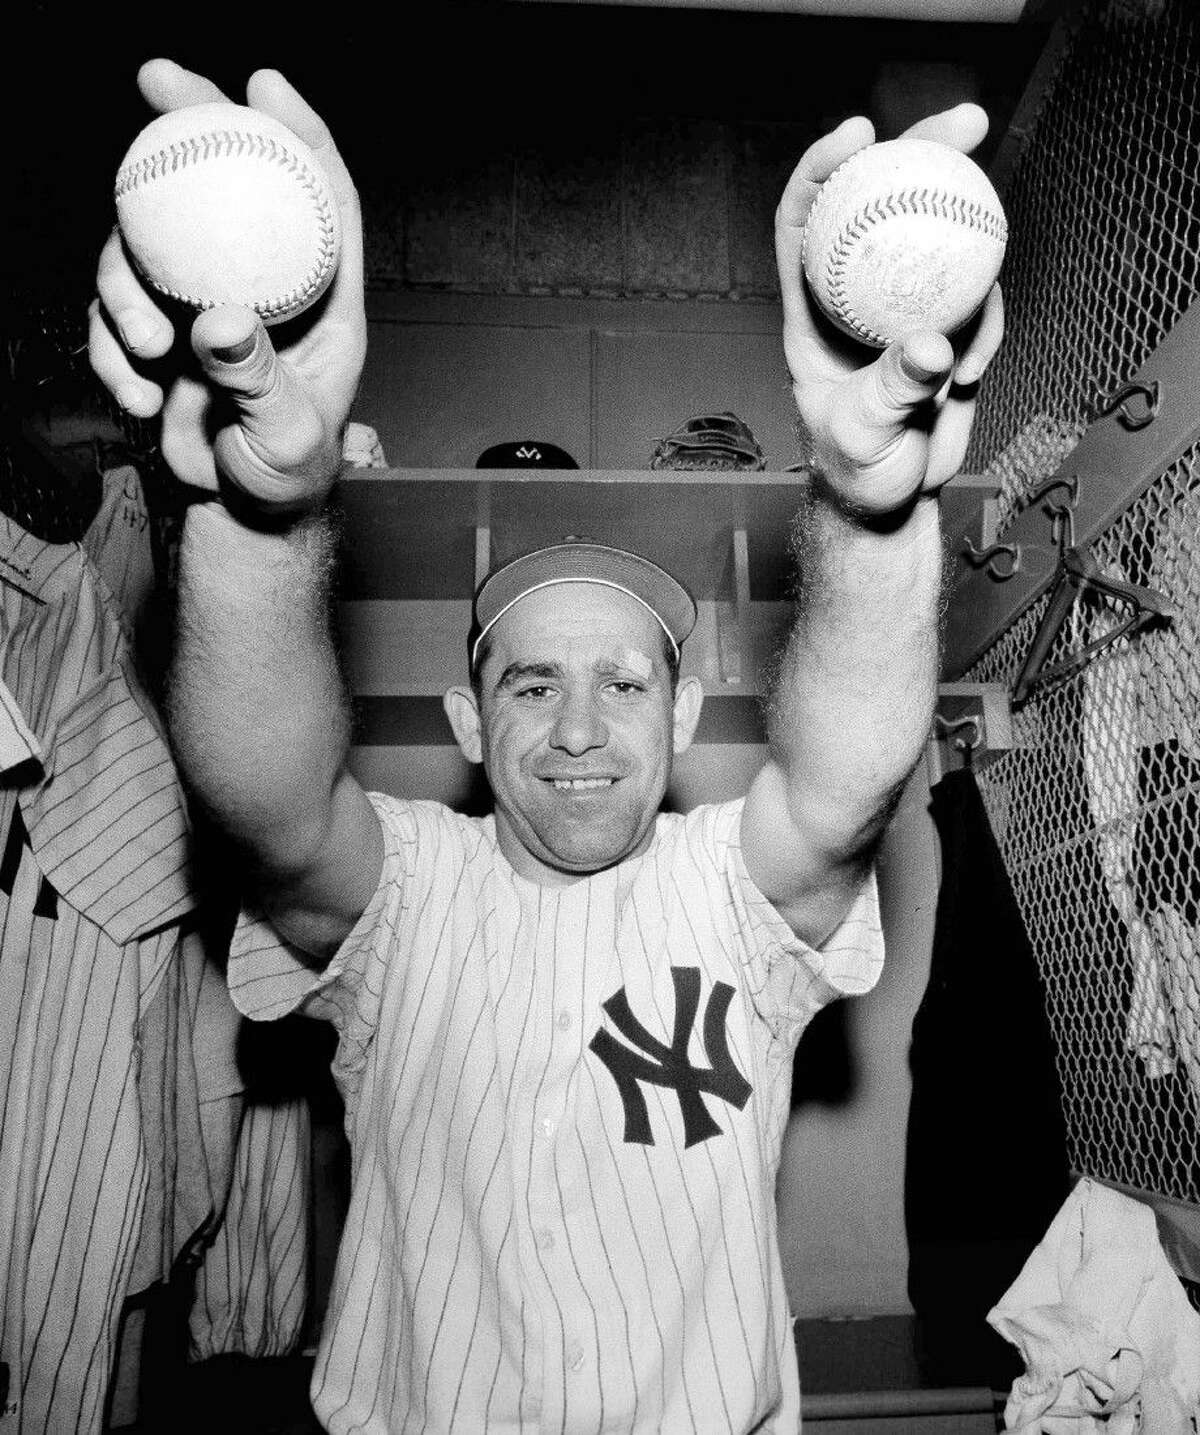 MLB great Yogi Berra gets his due in 'It Ain't Over